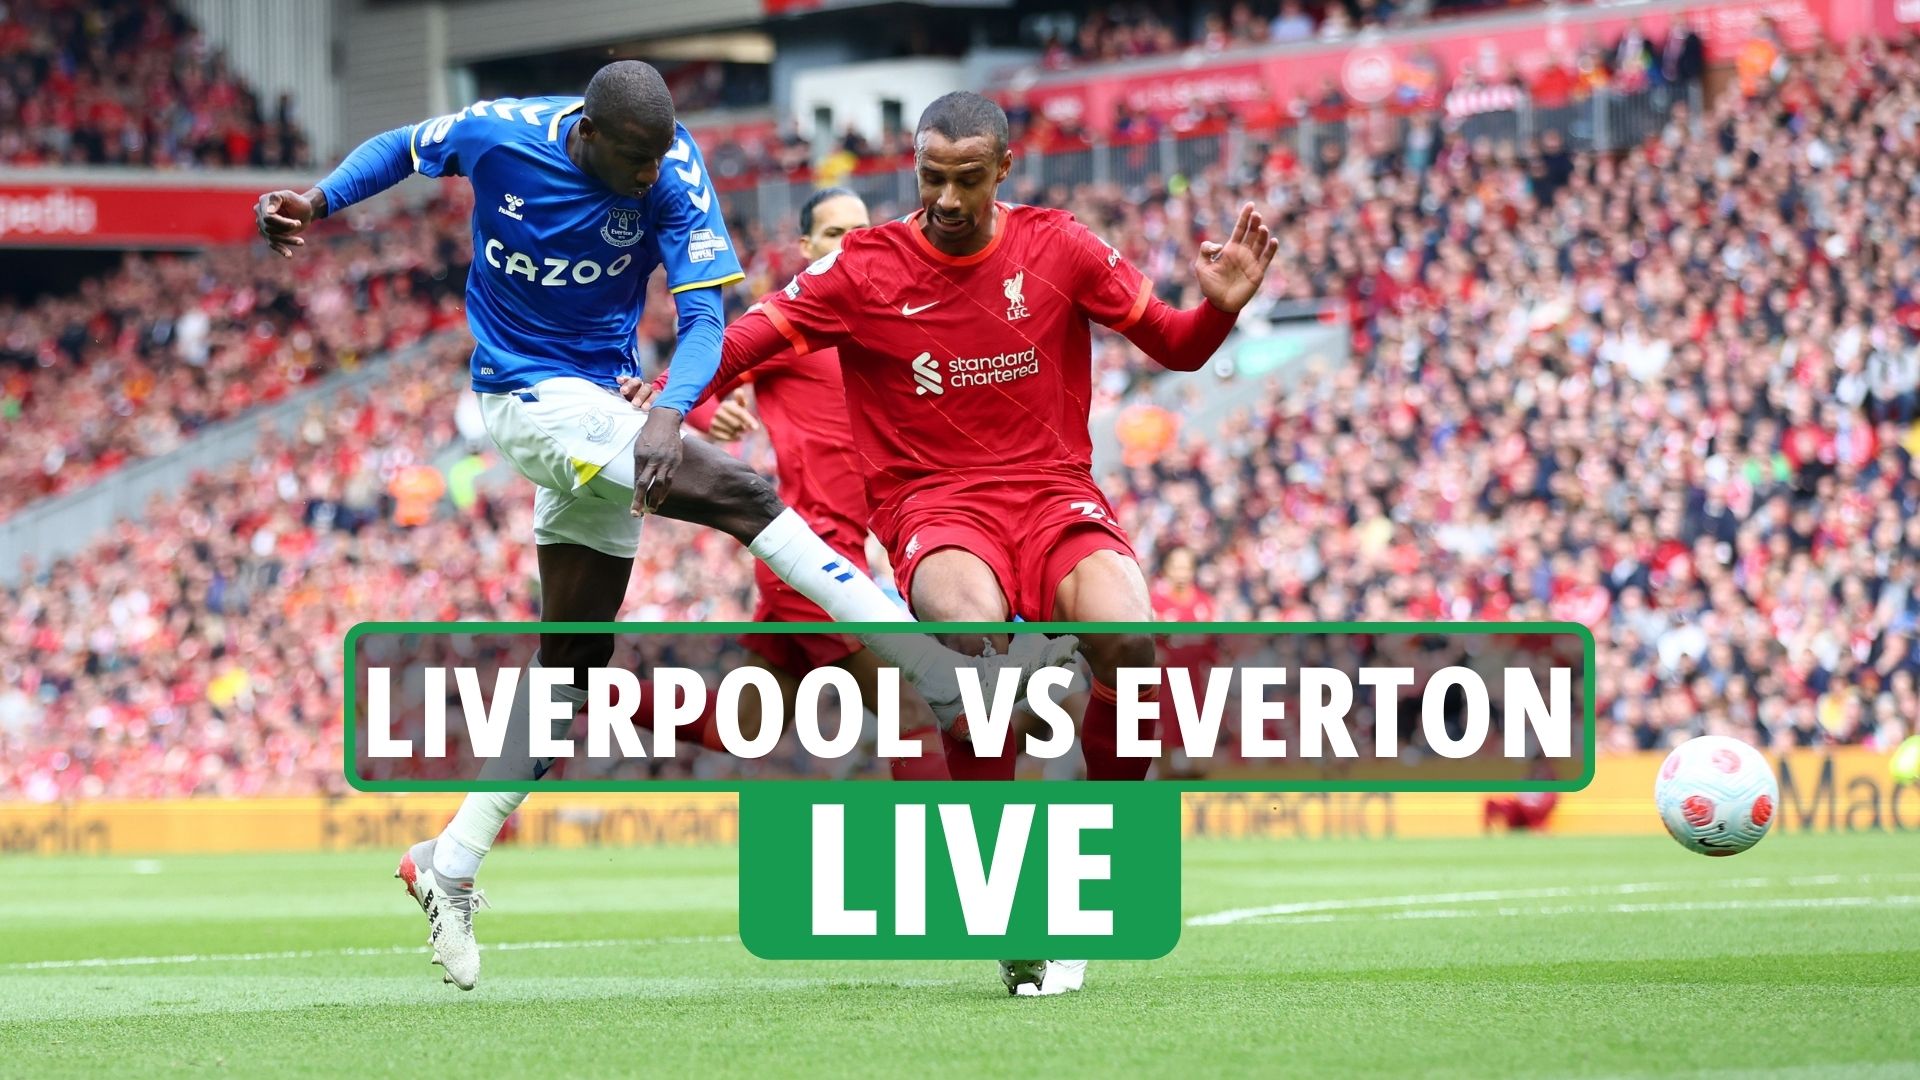 Liverpool vs Everton: TV channel, live stream, kick-off time and team news